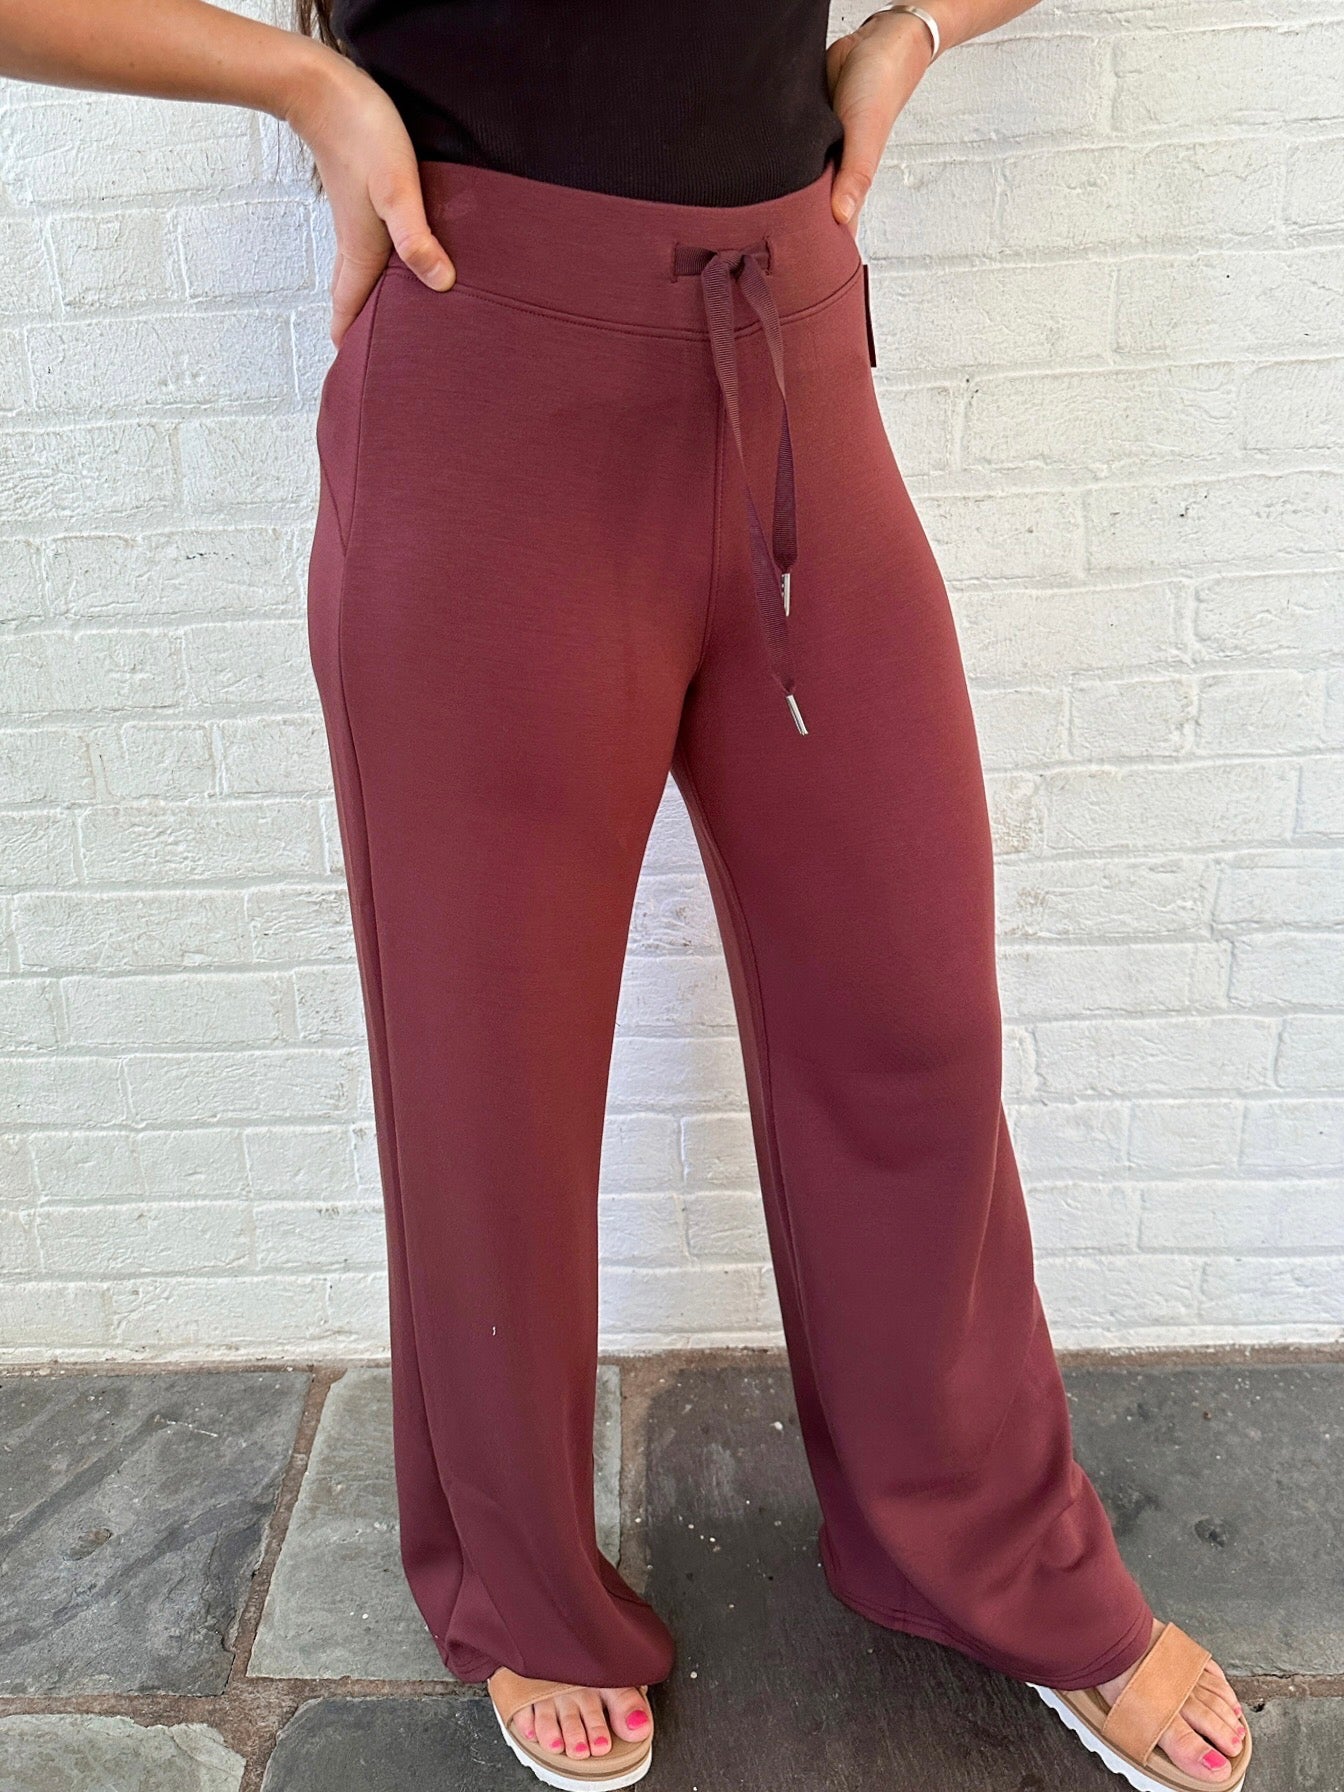 SPANX, Pants & Jumpsuits, Spanx Burgundy Wine Faux Leather Ready To Wow High  Waist Leggings